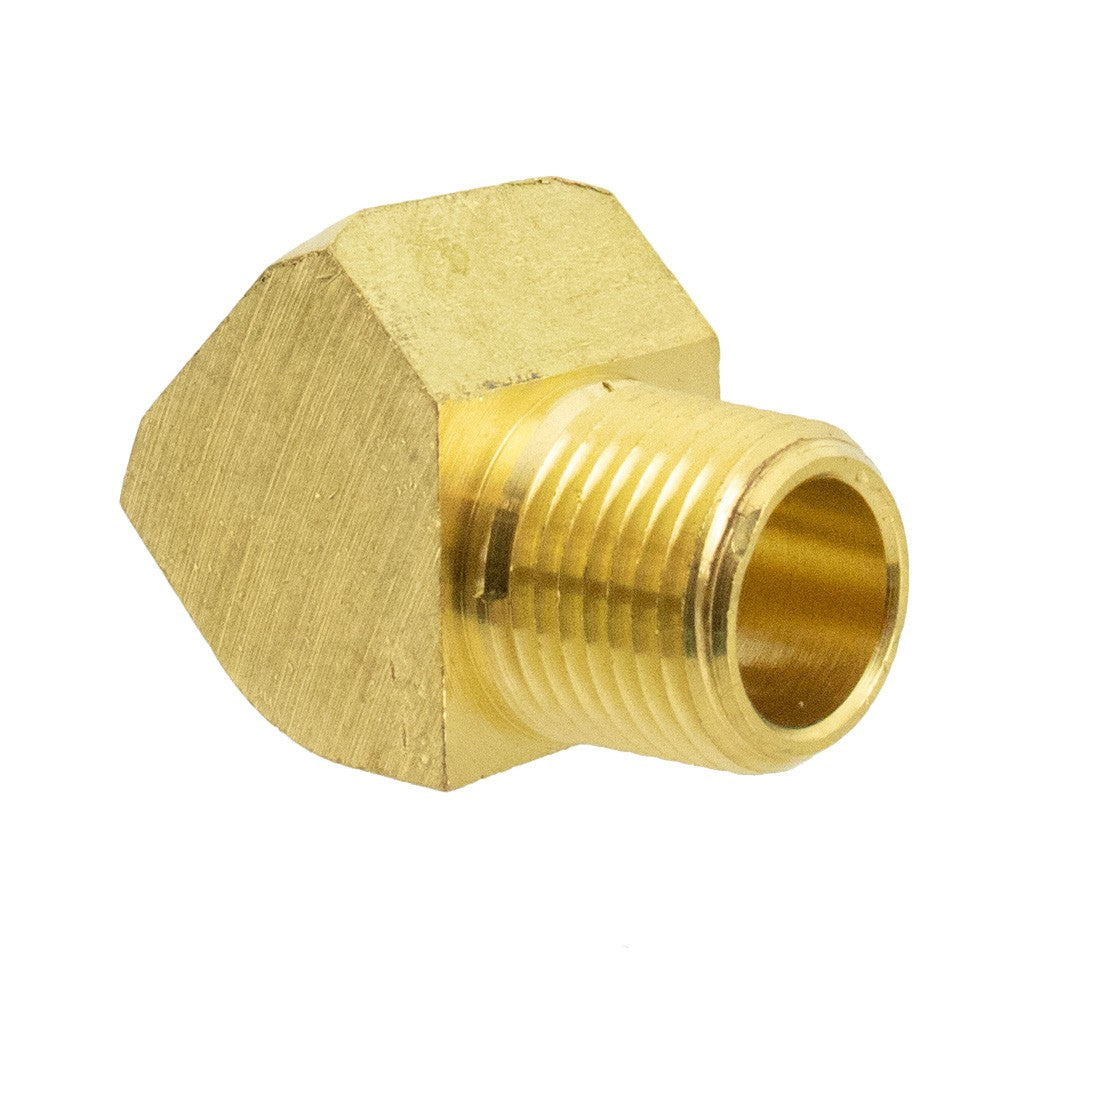 IPC Eagle Fitting - 1/2 Inch NPT x 45° Street Elbow Brass - Angled Front View